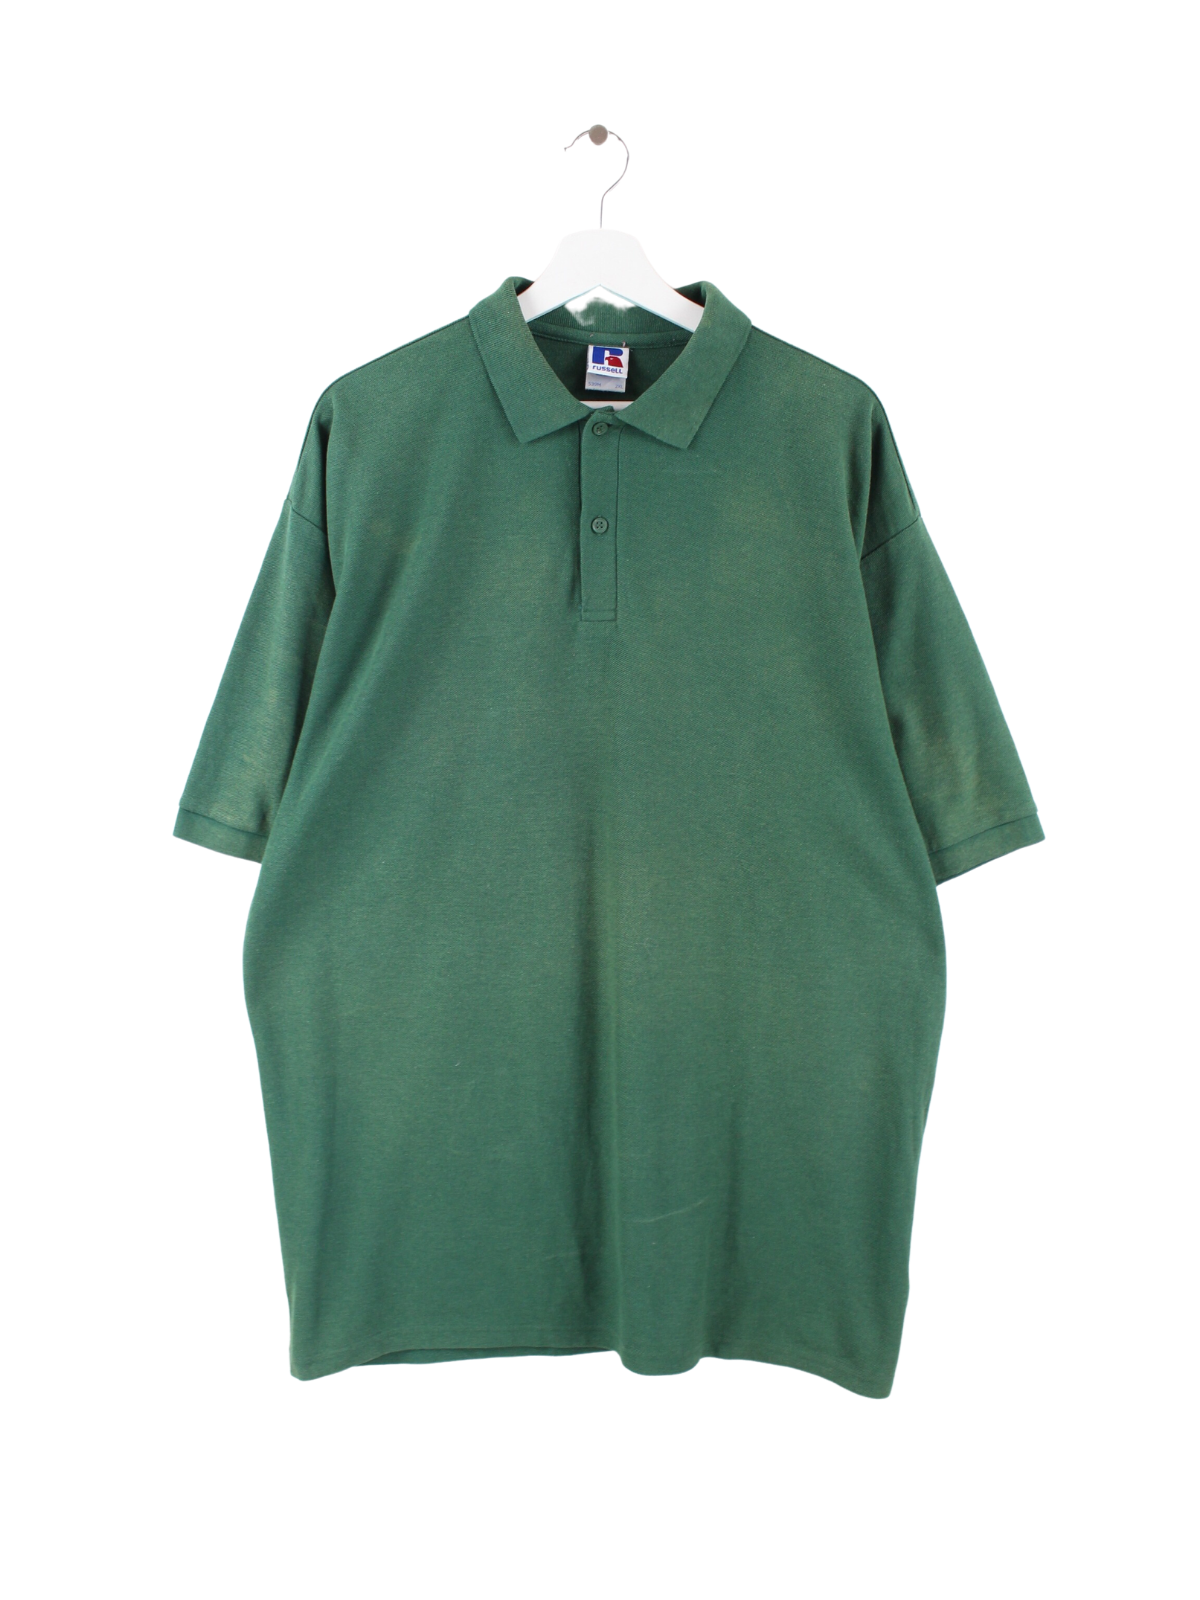 Russell Athletic Company Polo Green XXL